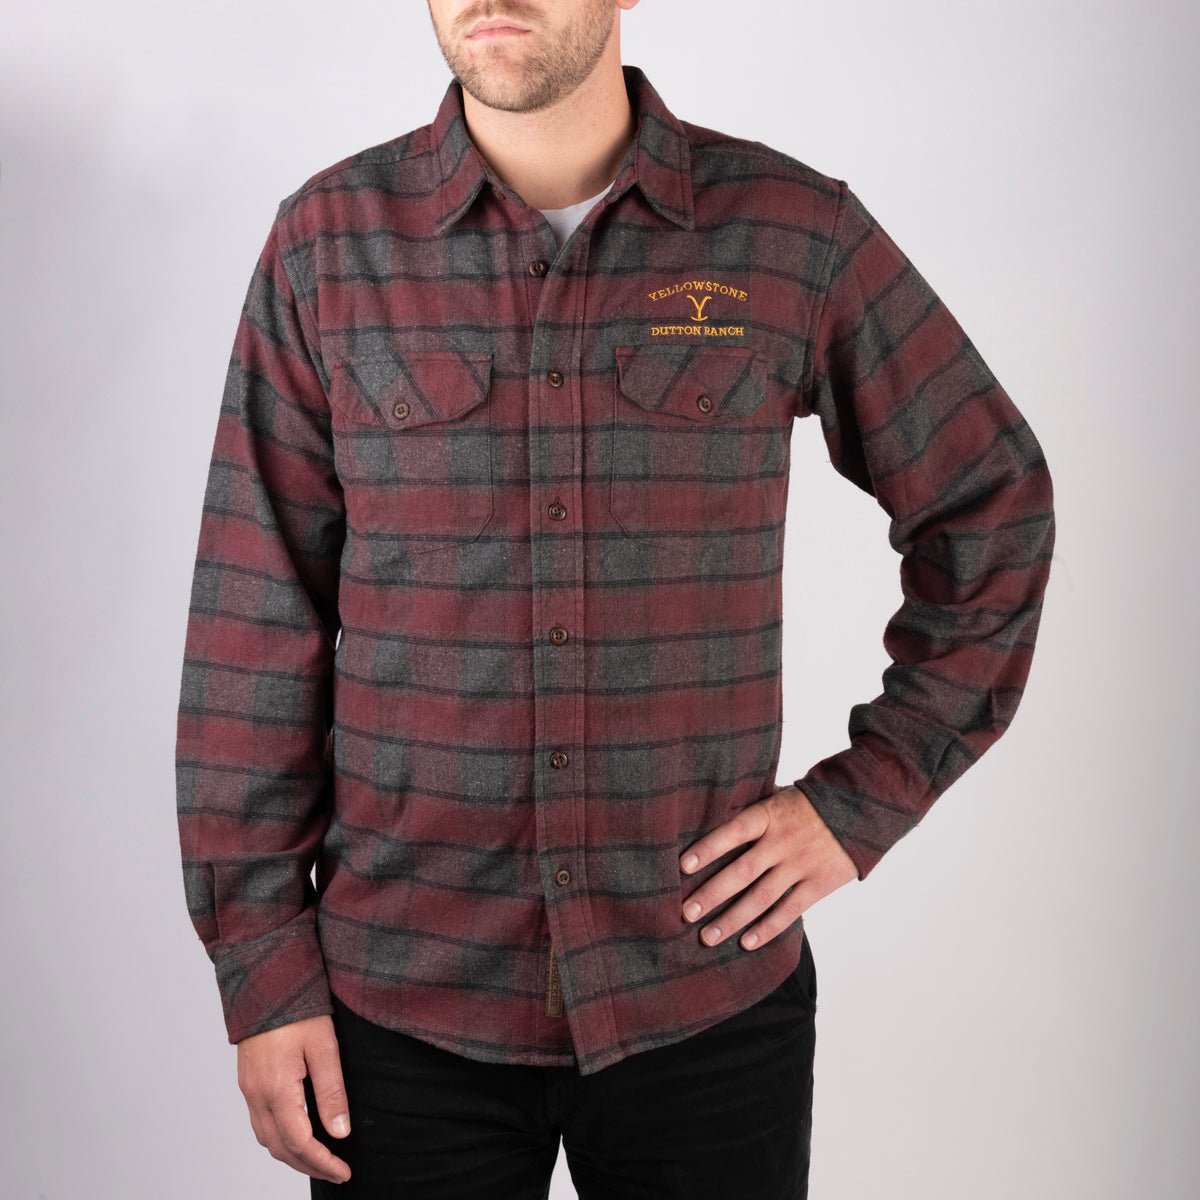 Yellowstone Dutton Ranch South Fork Embroidered Grindle Shirt - Paramount Shop